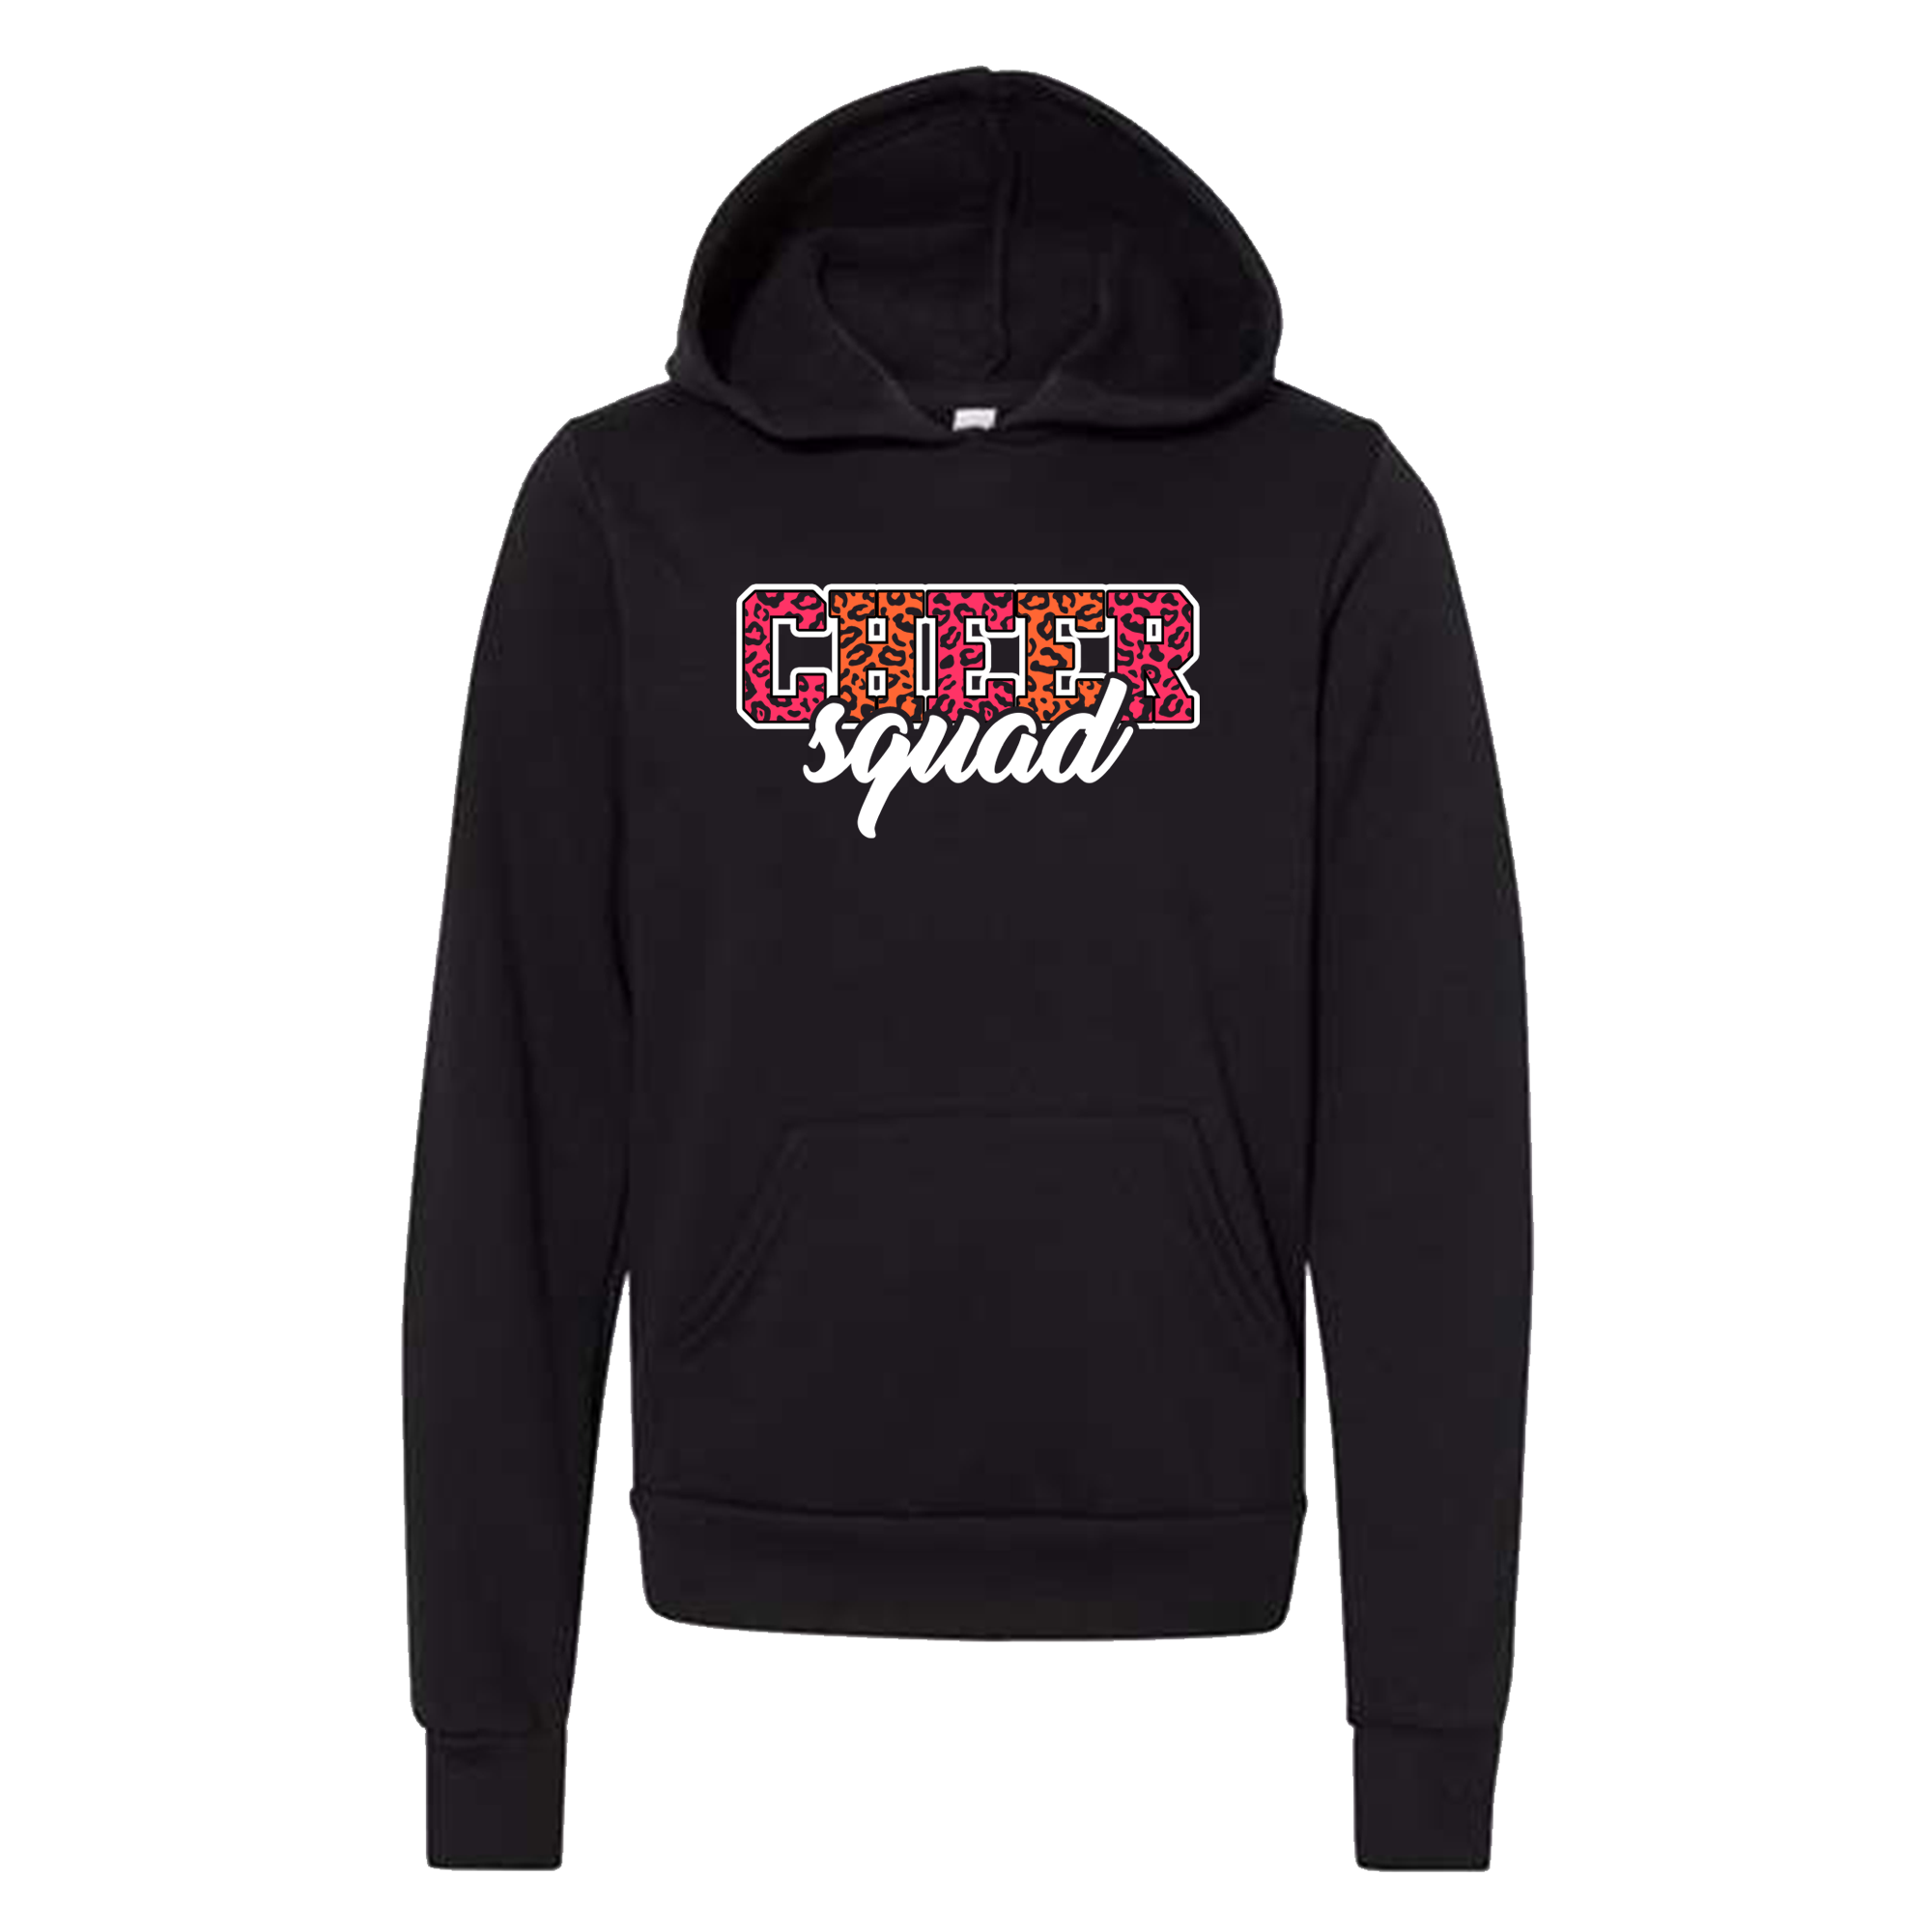 Youth "Cheer Squad Cheetah" Fleece Pullover